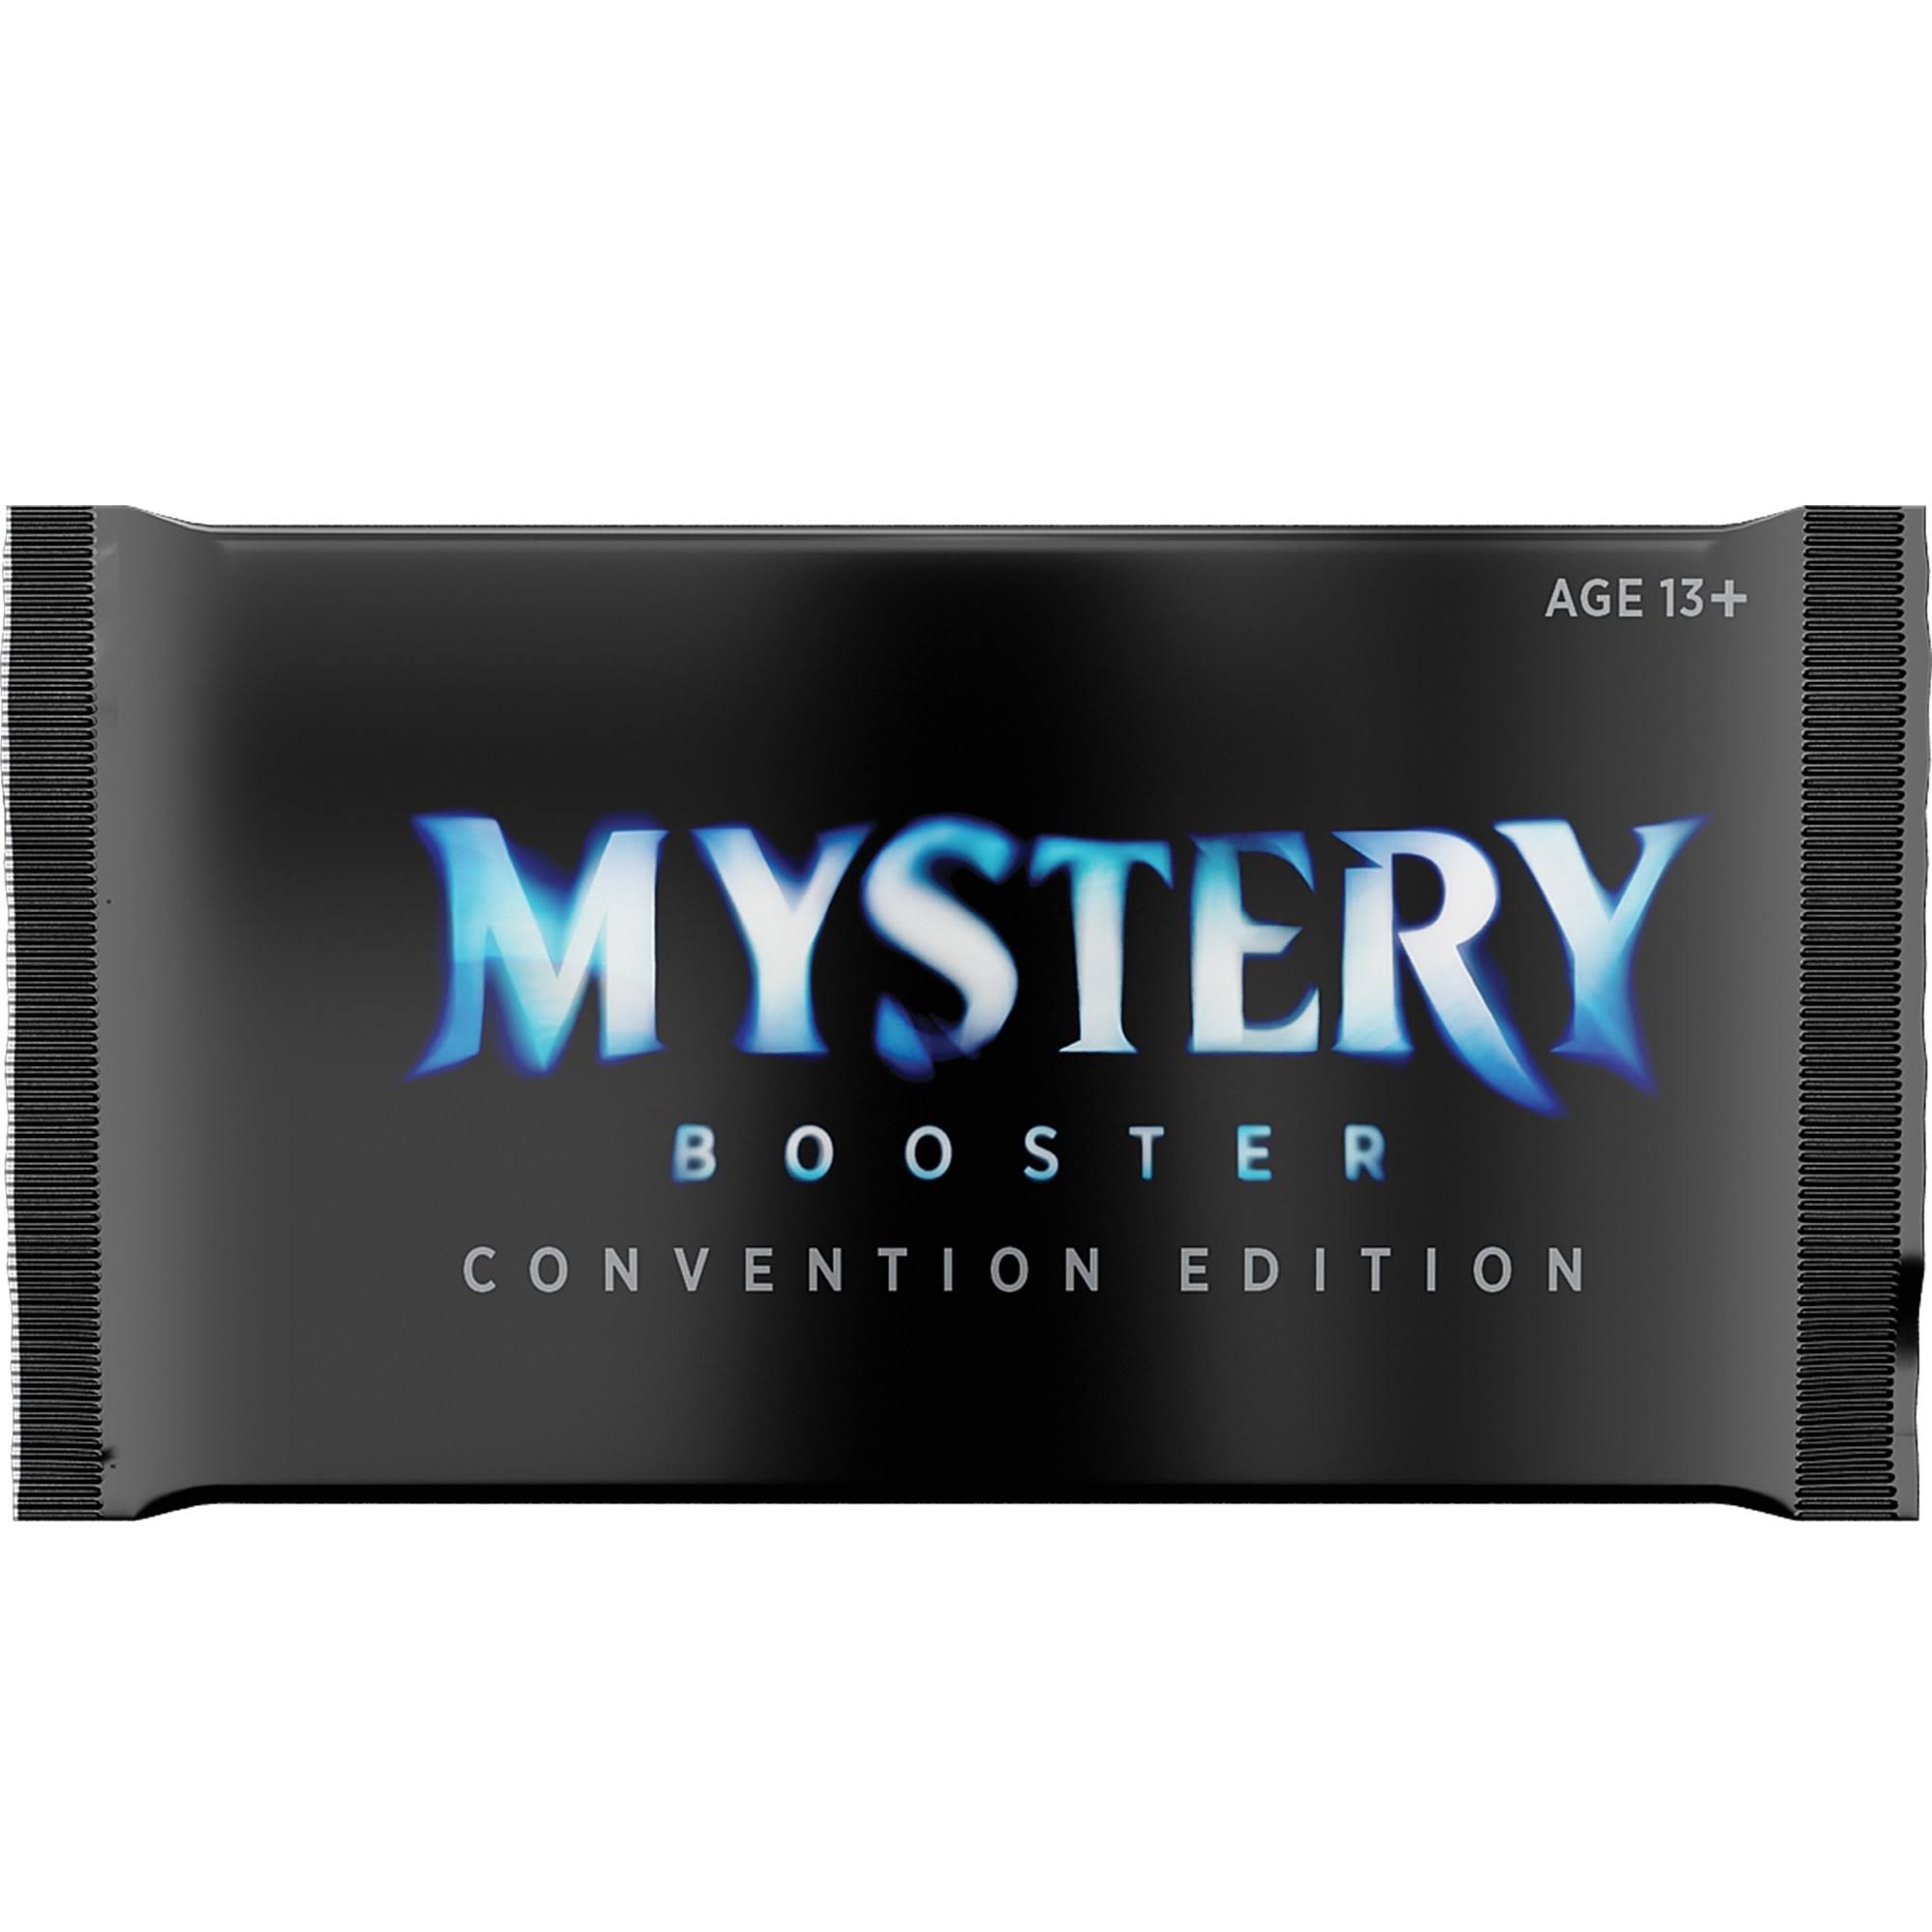 Mystery Booster Convention Edition